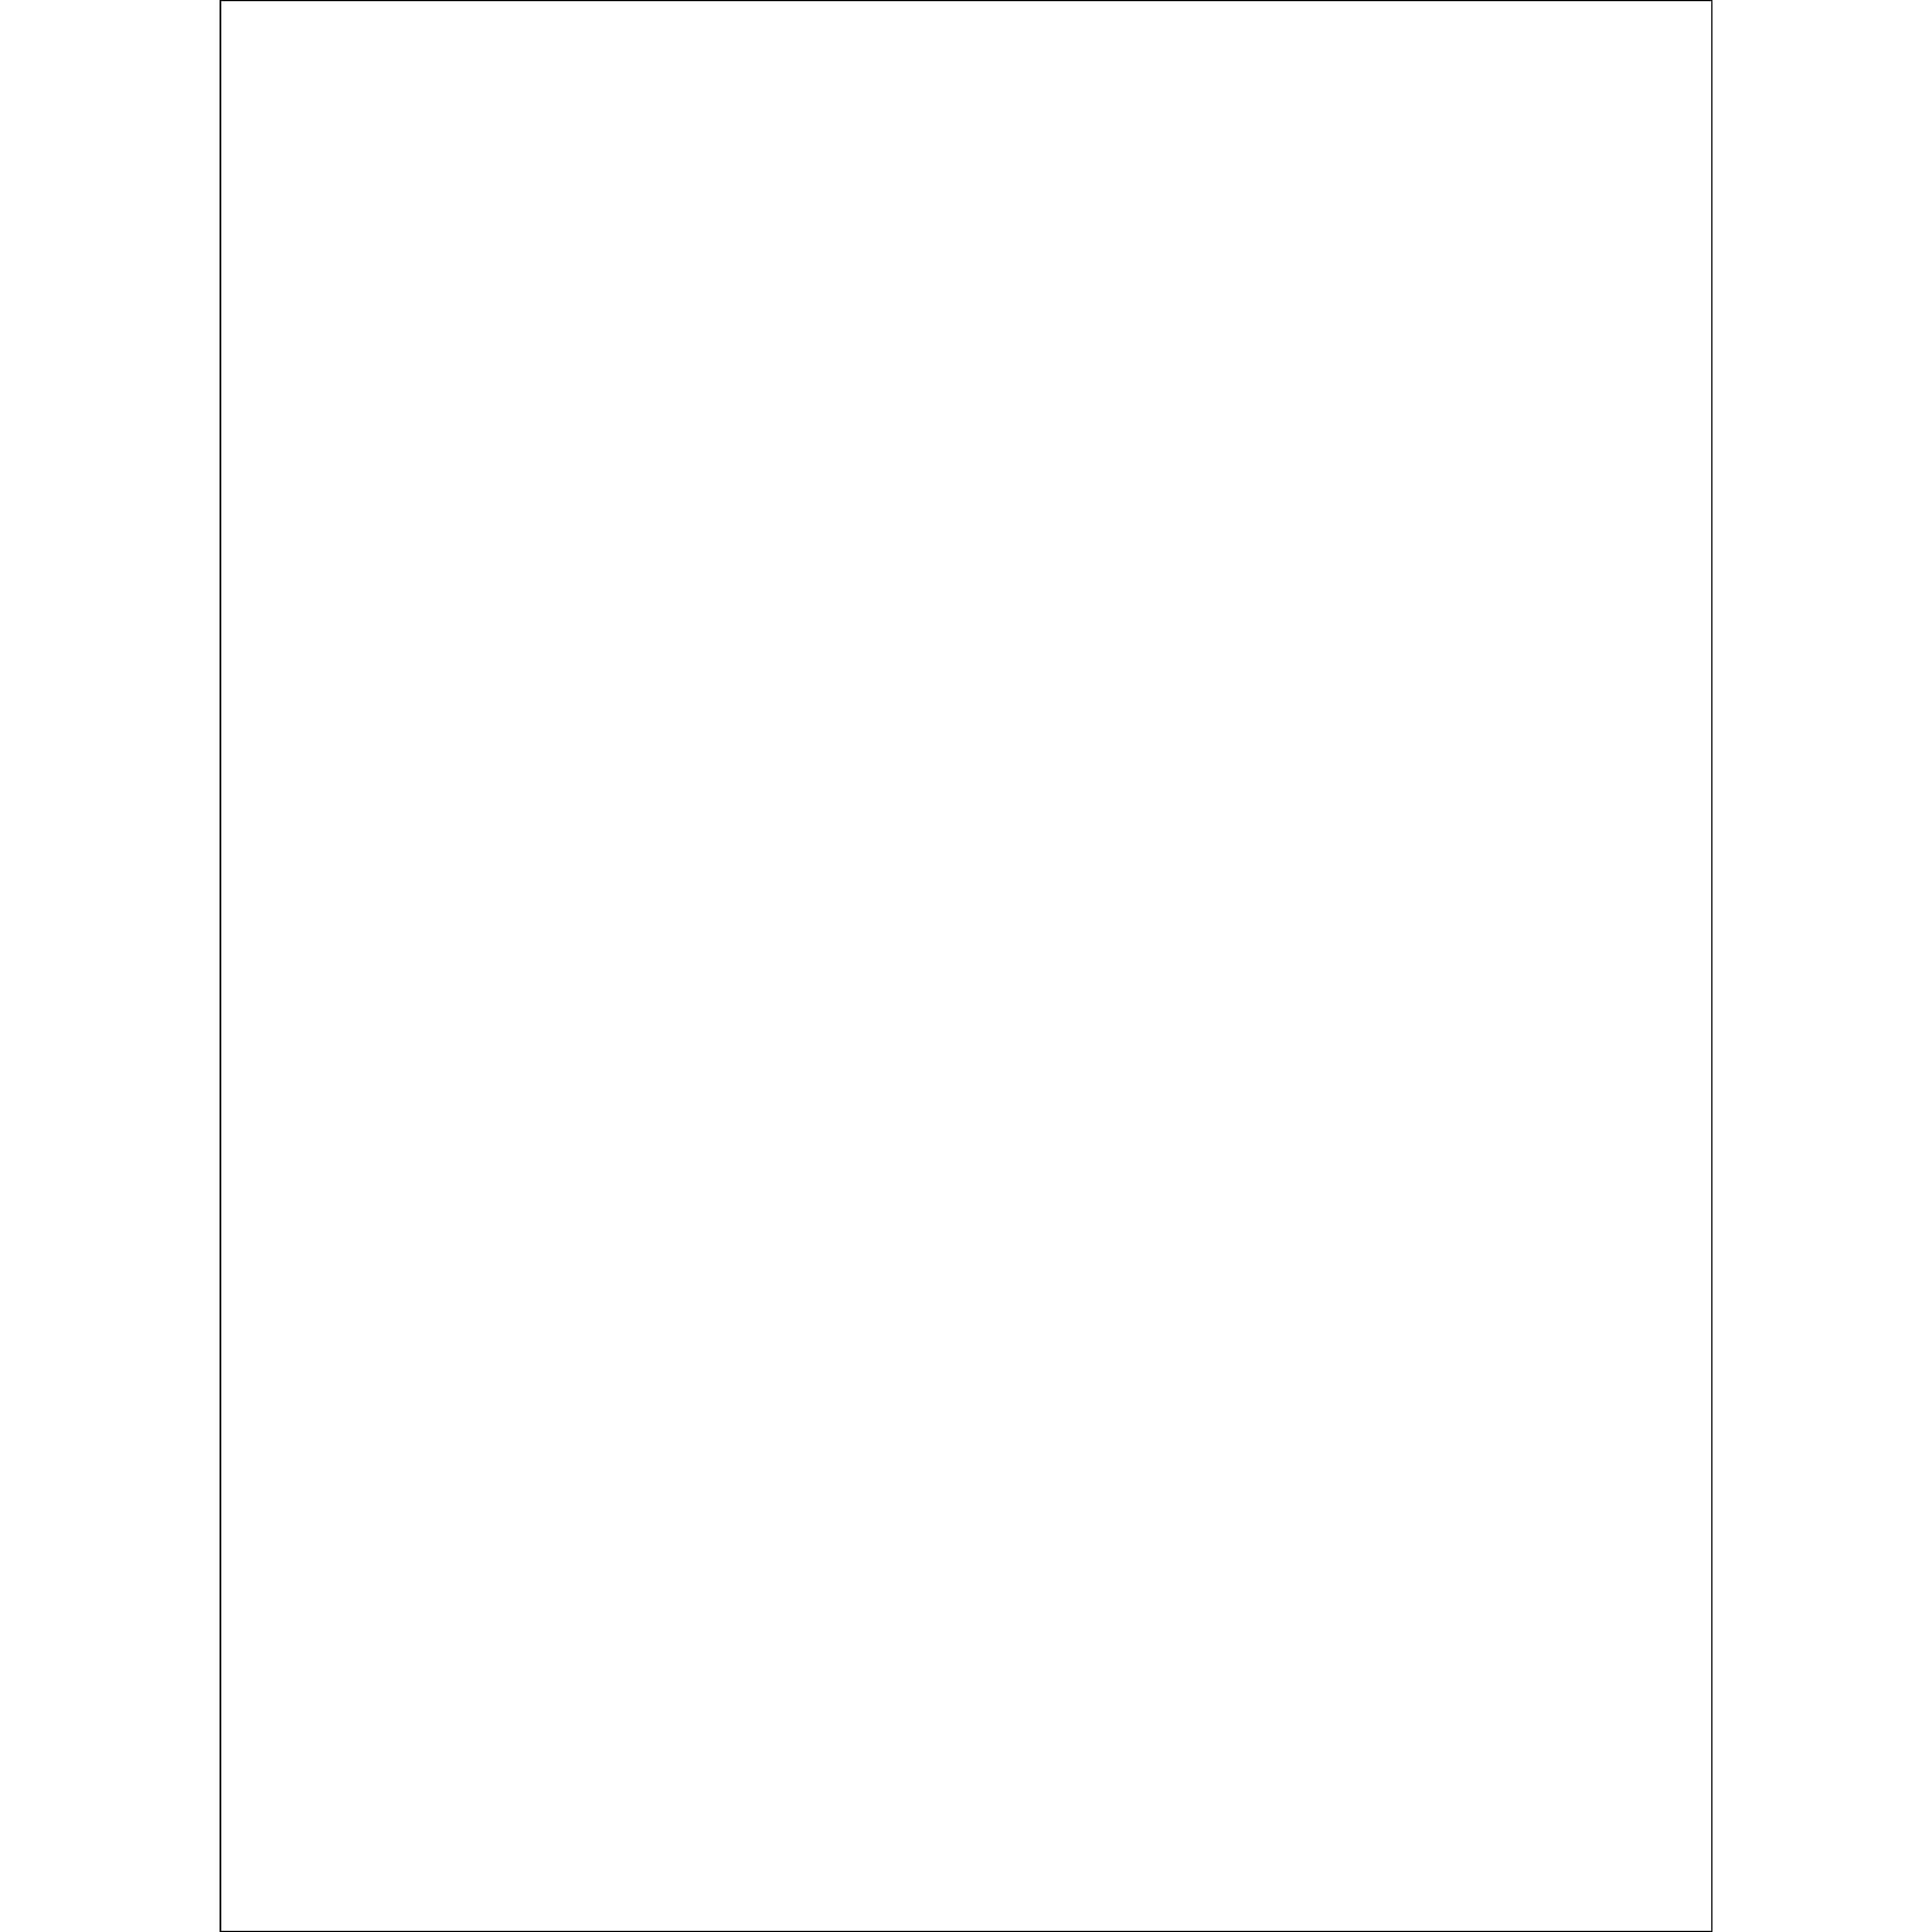 PA Paper™ Accents 8.5" x 11" Self Adhesive Paper, 25 Sheets